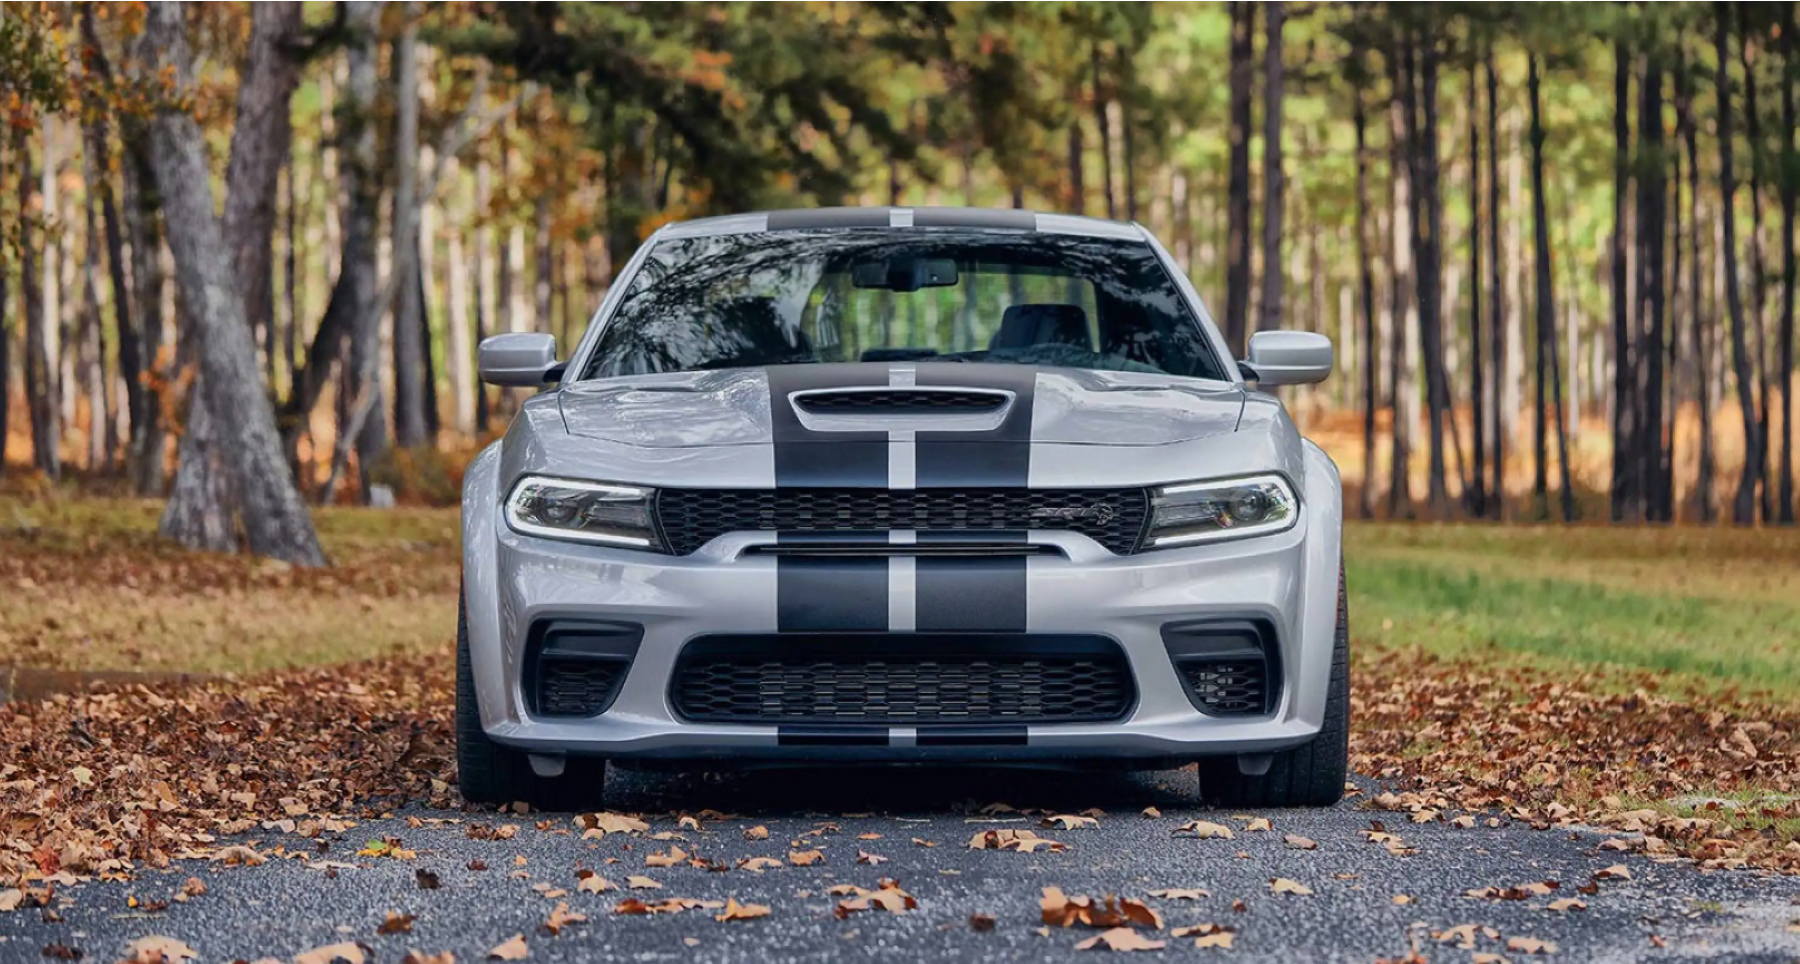 A gray 2022 Dodge Charger SRT Hellcat Widebody muscle car with a hood vent and racing stripe parked on a forest trail